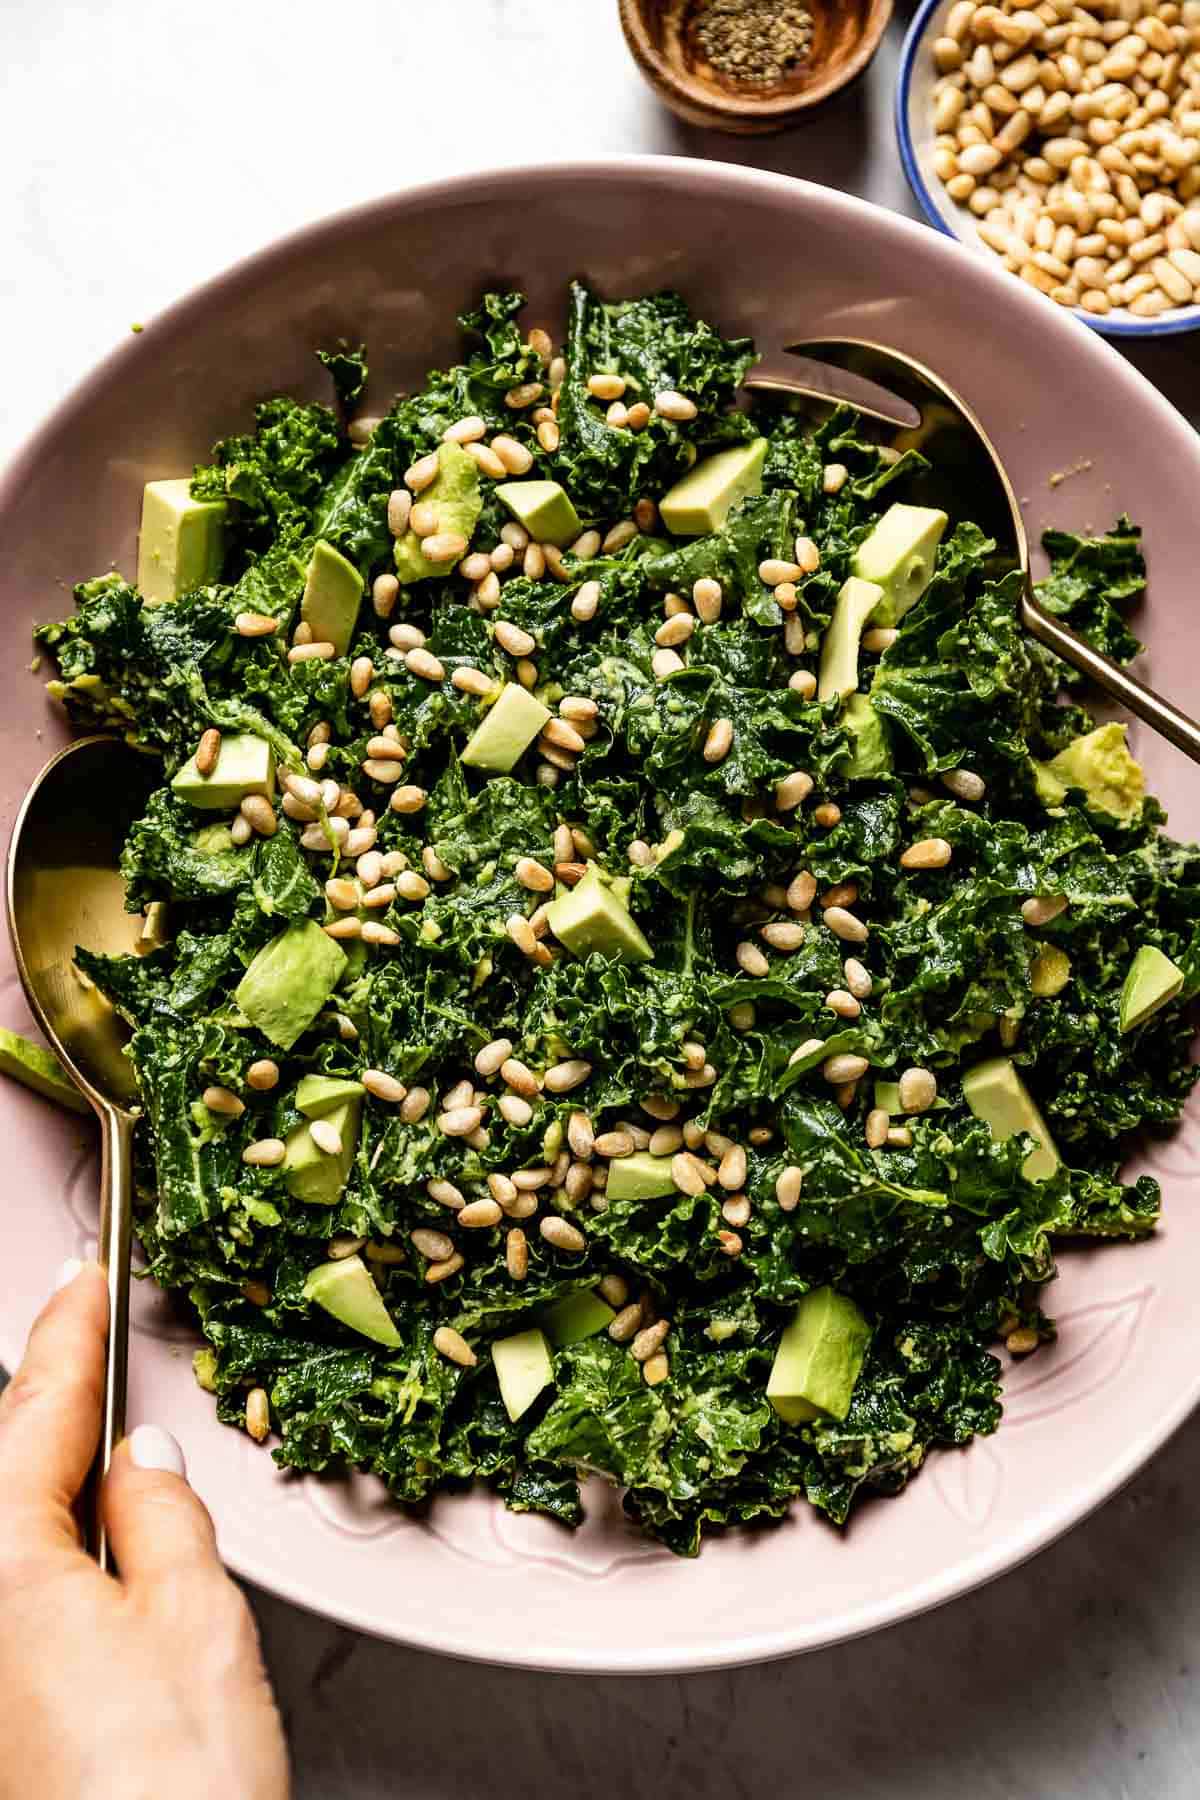 A fun summer salad made with kale and avocado served in a bowl